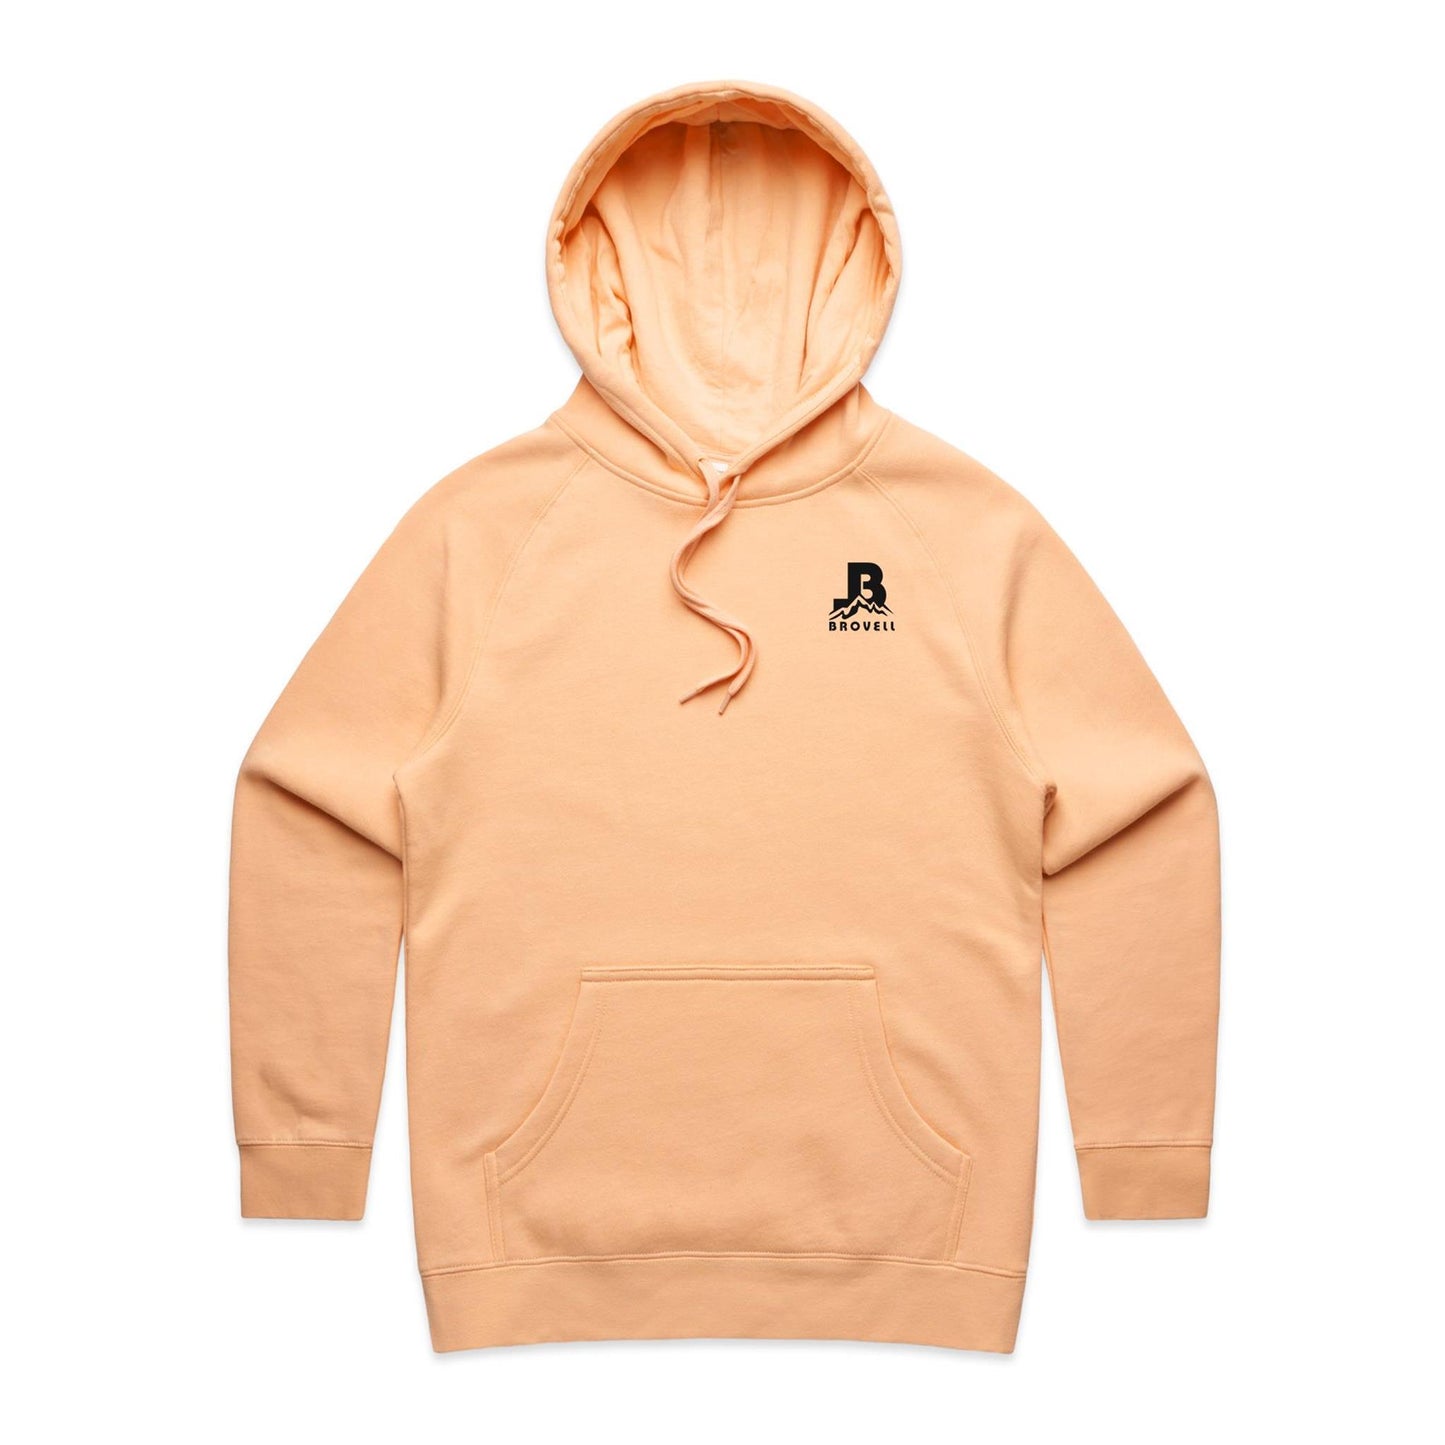 AS Colour - Women's Supply Hood - Front and Back Logo